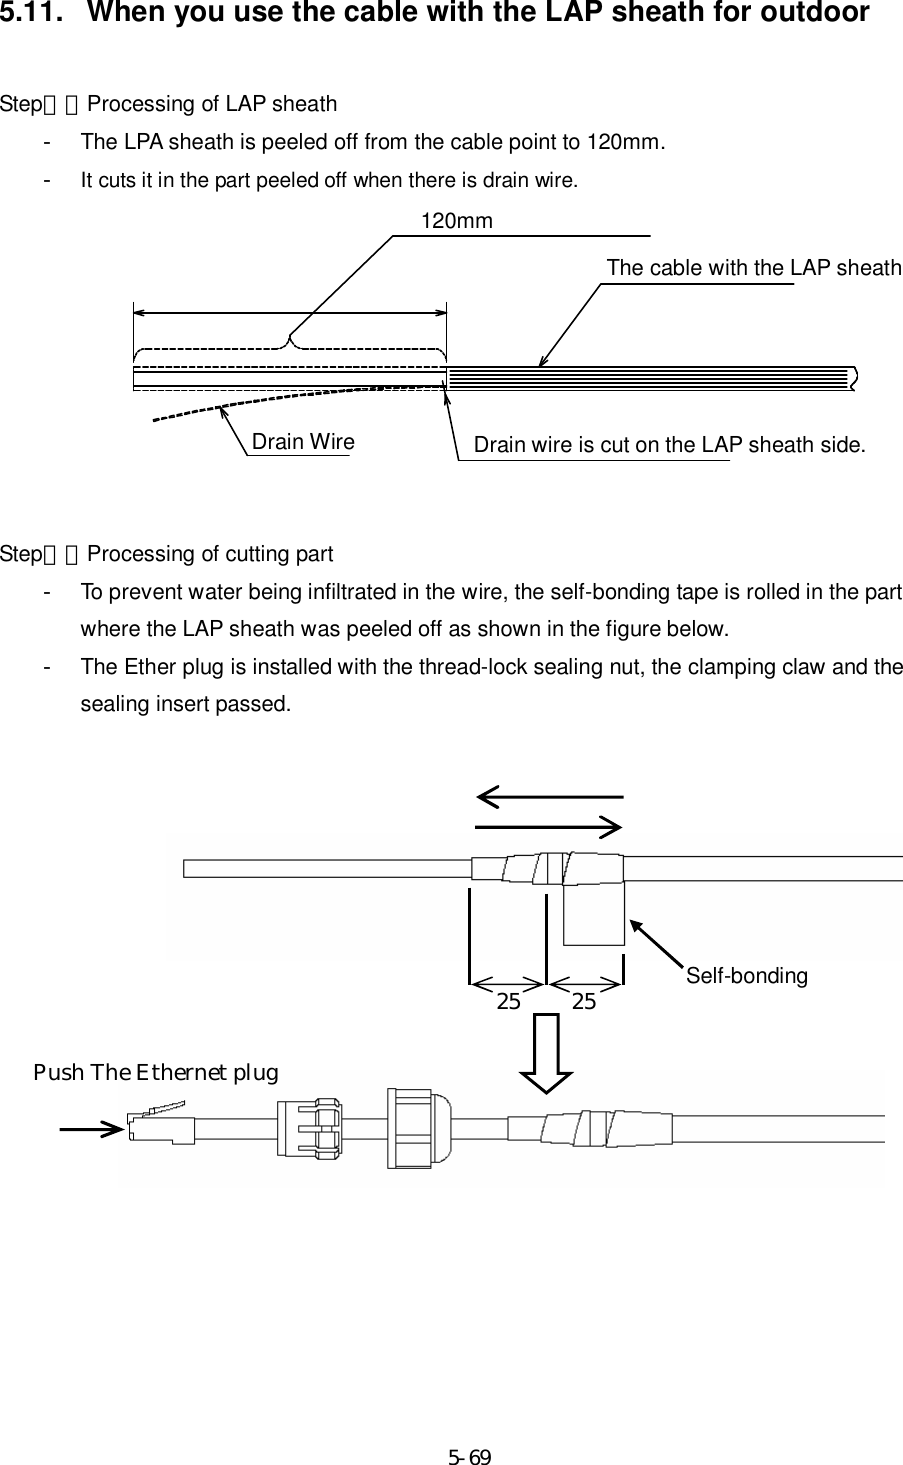     5-6925  25  Self-bonding Push The Ethernet plug 5.11.  When you use the cable with the LAP sheath for outdoor  Step１．Processing of LAP sheath -  The LPA sheath is peeled off from the cable point to 120mm. - It cuts it in the part peeled off when there is drain wire.          Step２．Processing of cutting part -  To prevent water being infiltrated in the wire, the self-bonding tape is rolled in the part where the LAP sheath was peeled off as shown in the figure below. -  The Ether plug is installed with the thread-lock sealing nut, the clamping claw and the sealing insert passed.             120mm The cable with the LAP sheath Drain wire is cut on the LAP sheath side. Drain Wire 